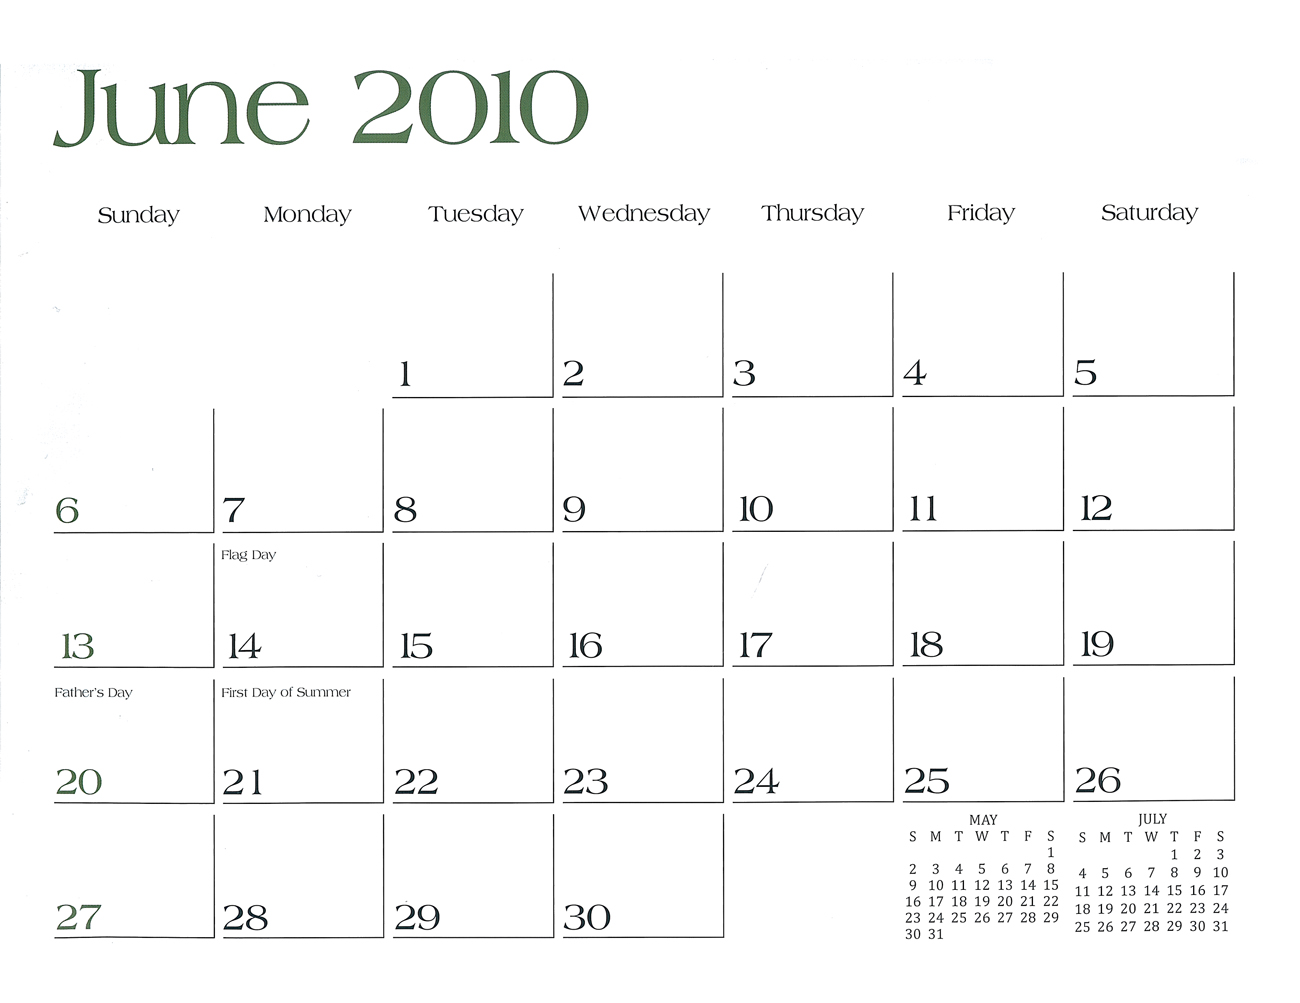 2010 Prophecy Calendar: June - He would be raised from the dead